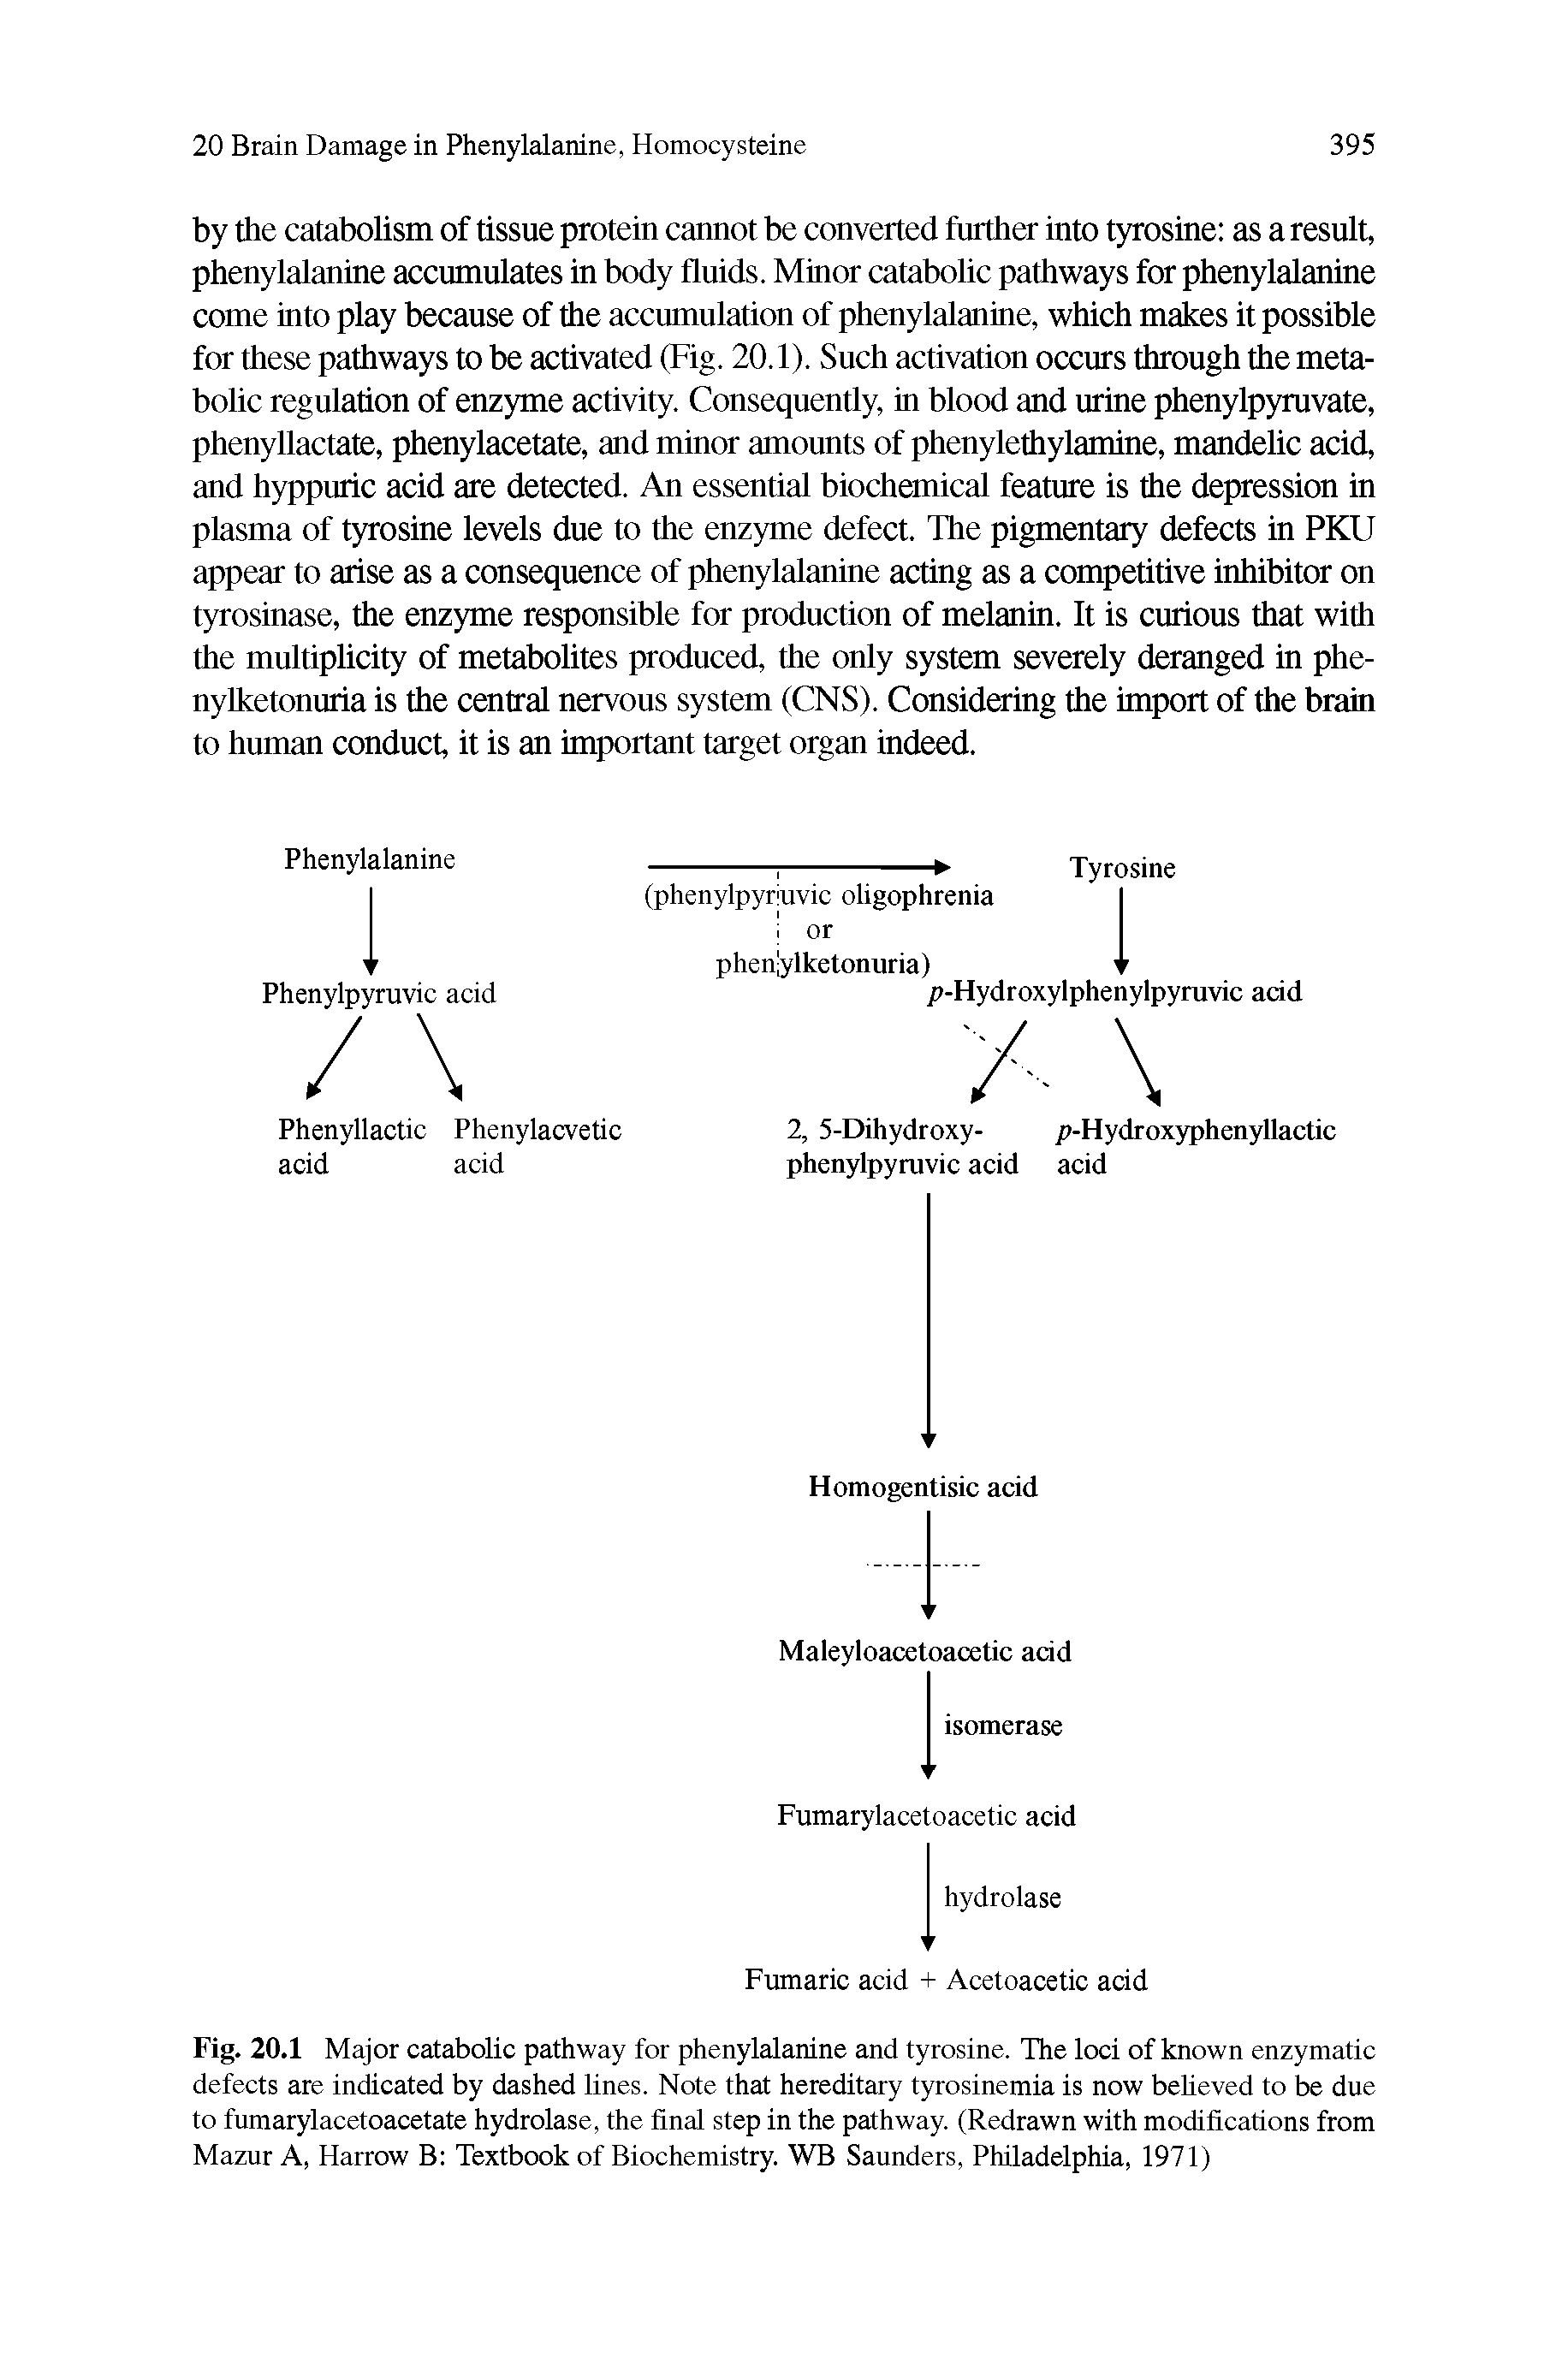 Fig. 20.1 Major catabolic pathway for phenylalanine and tyrosine. The loci of known enzymatic defects are indicated by dashed lines. Note that hereditary tyrosinemia is now believed to be due to fumarylacetoacetate hydrolase, the final step in the pathway. (Redrawn with modifications from Mazur A, Harrow B Textbook of Biochemistry. WB Saunders, Philadelphia, 1971)...